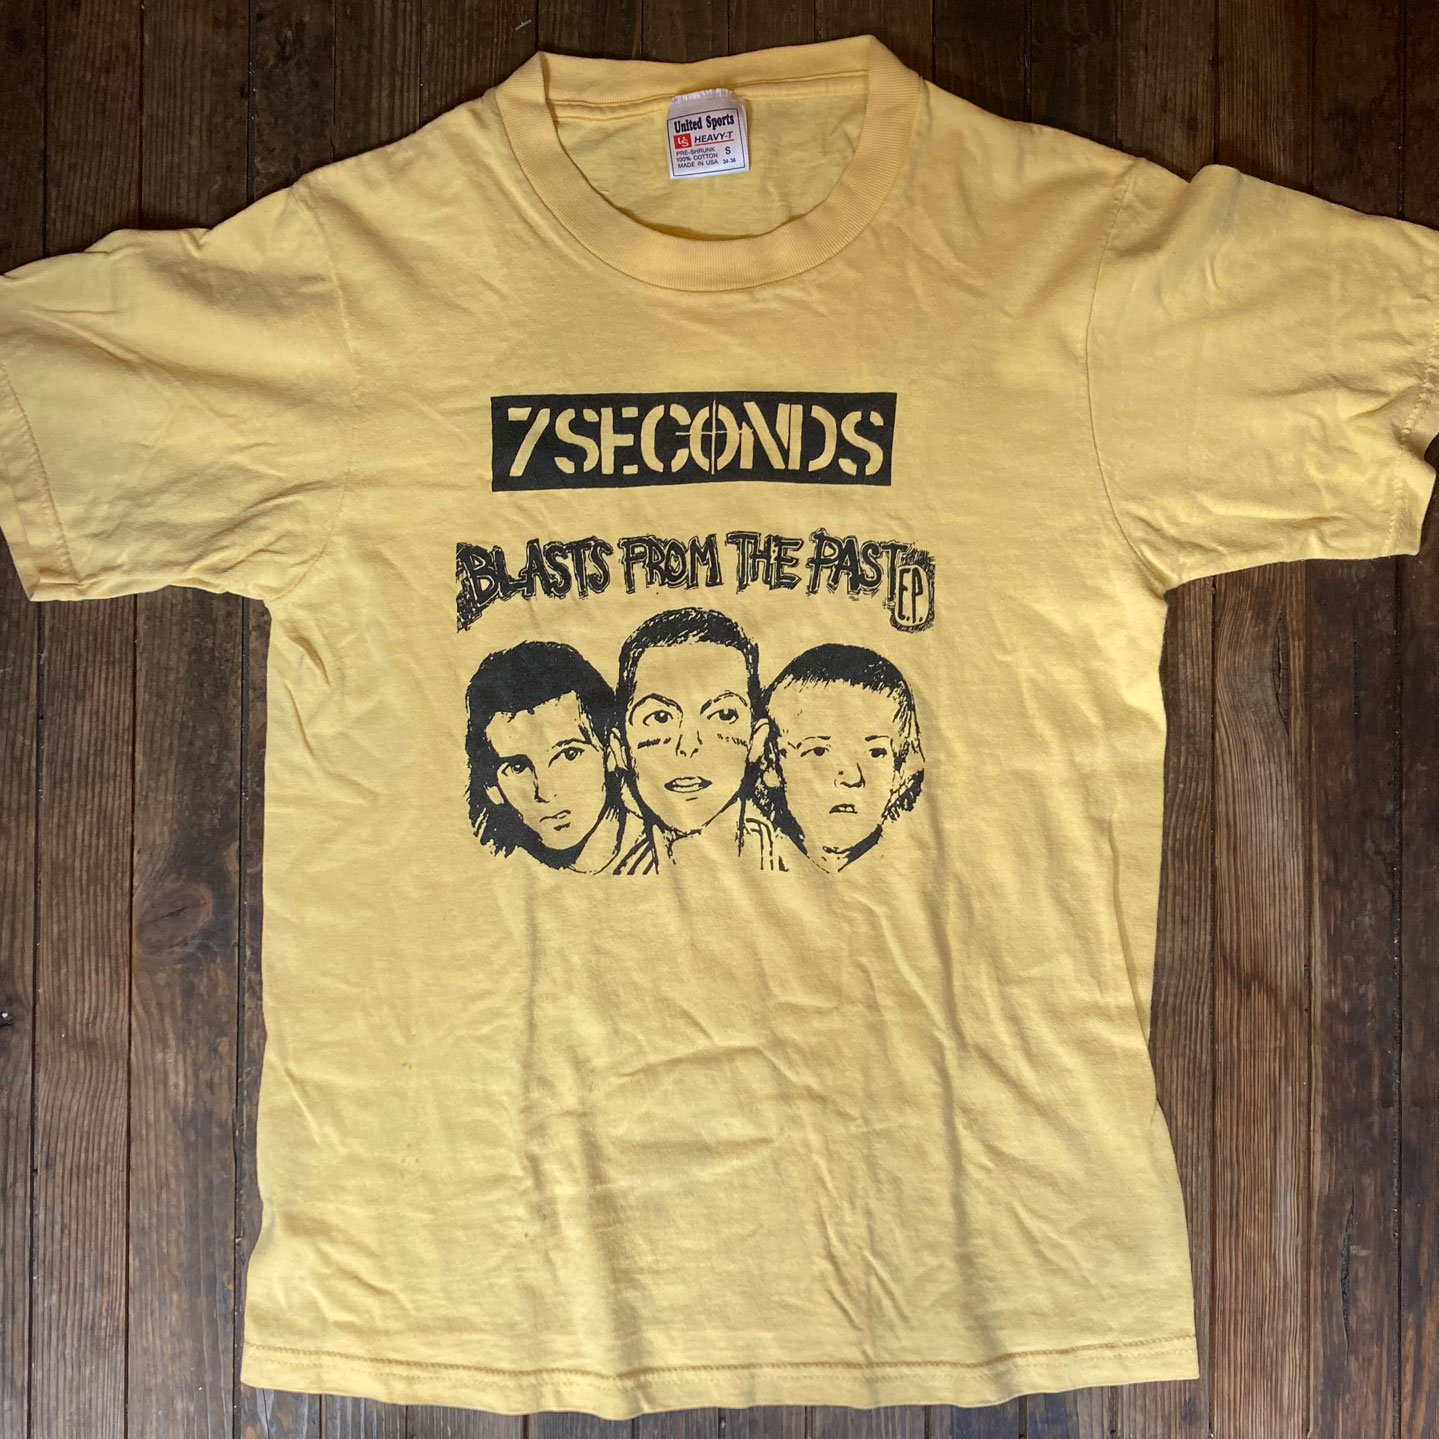 USED! 7SECONDS Tシャツ BLAST FROM THE PAST